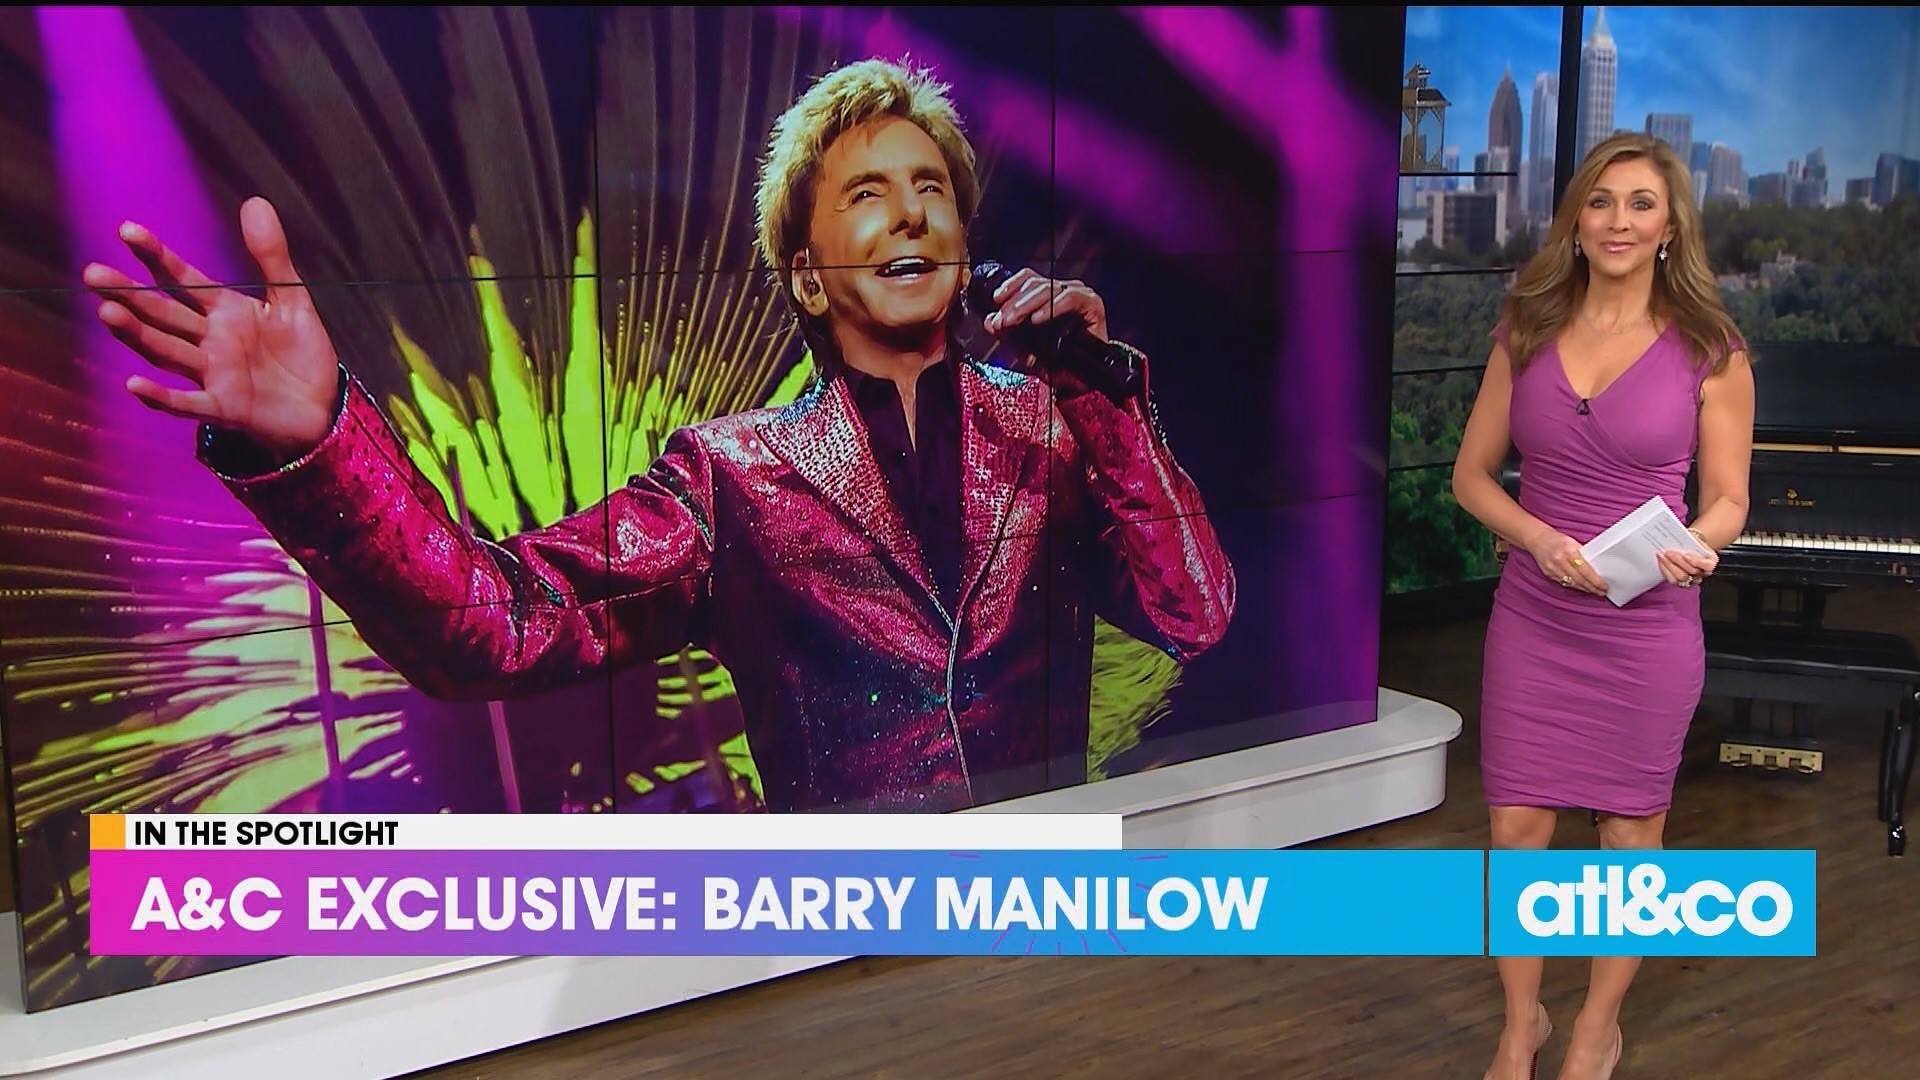 Grammy-winning superstar Barry Manilow reunited with Christine backstage before his Atlanta show. He gives back to high school music programs nationwide.